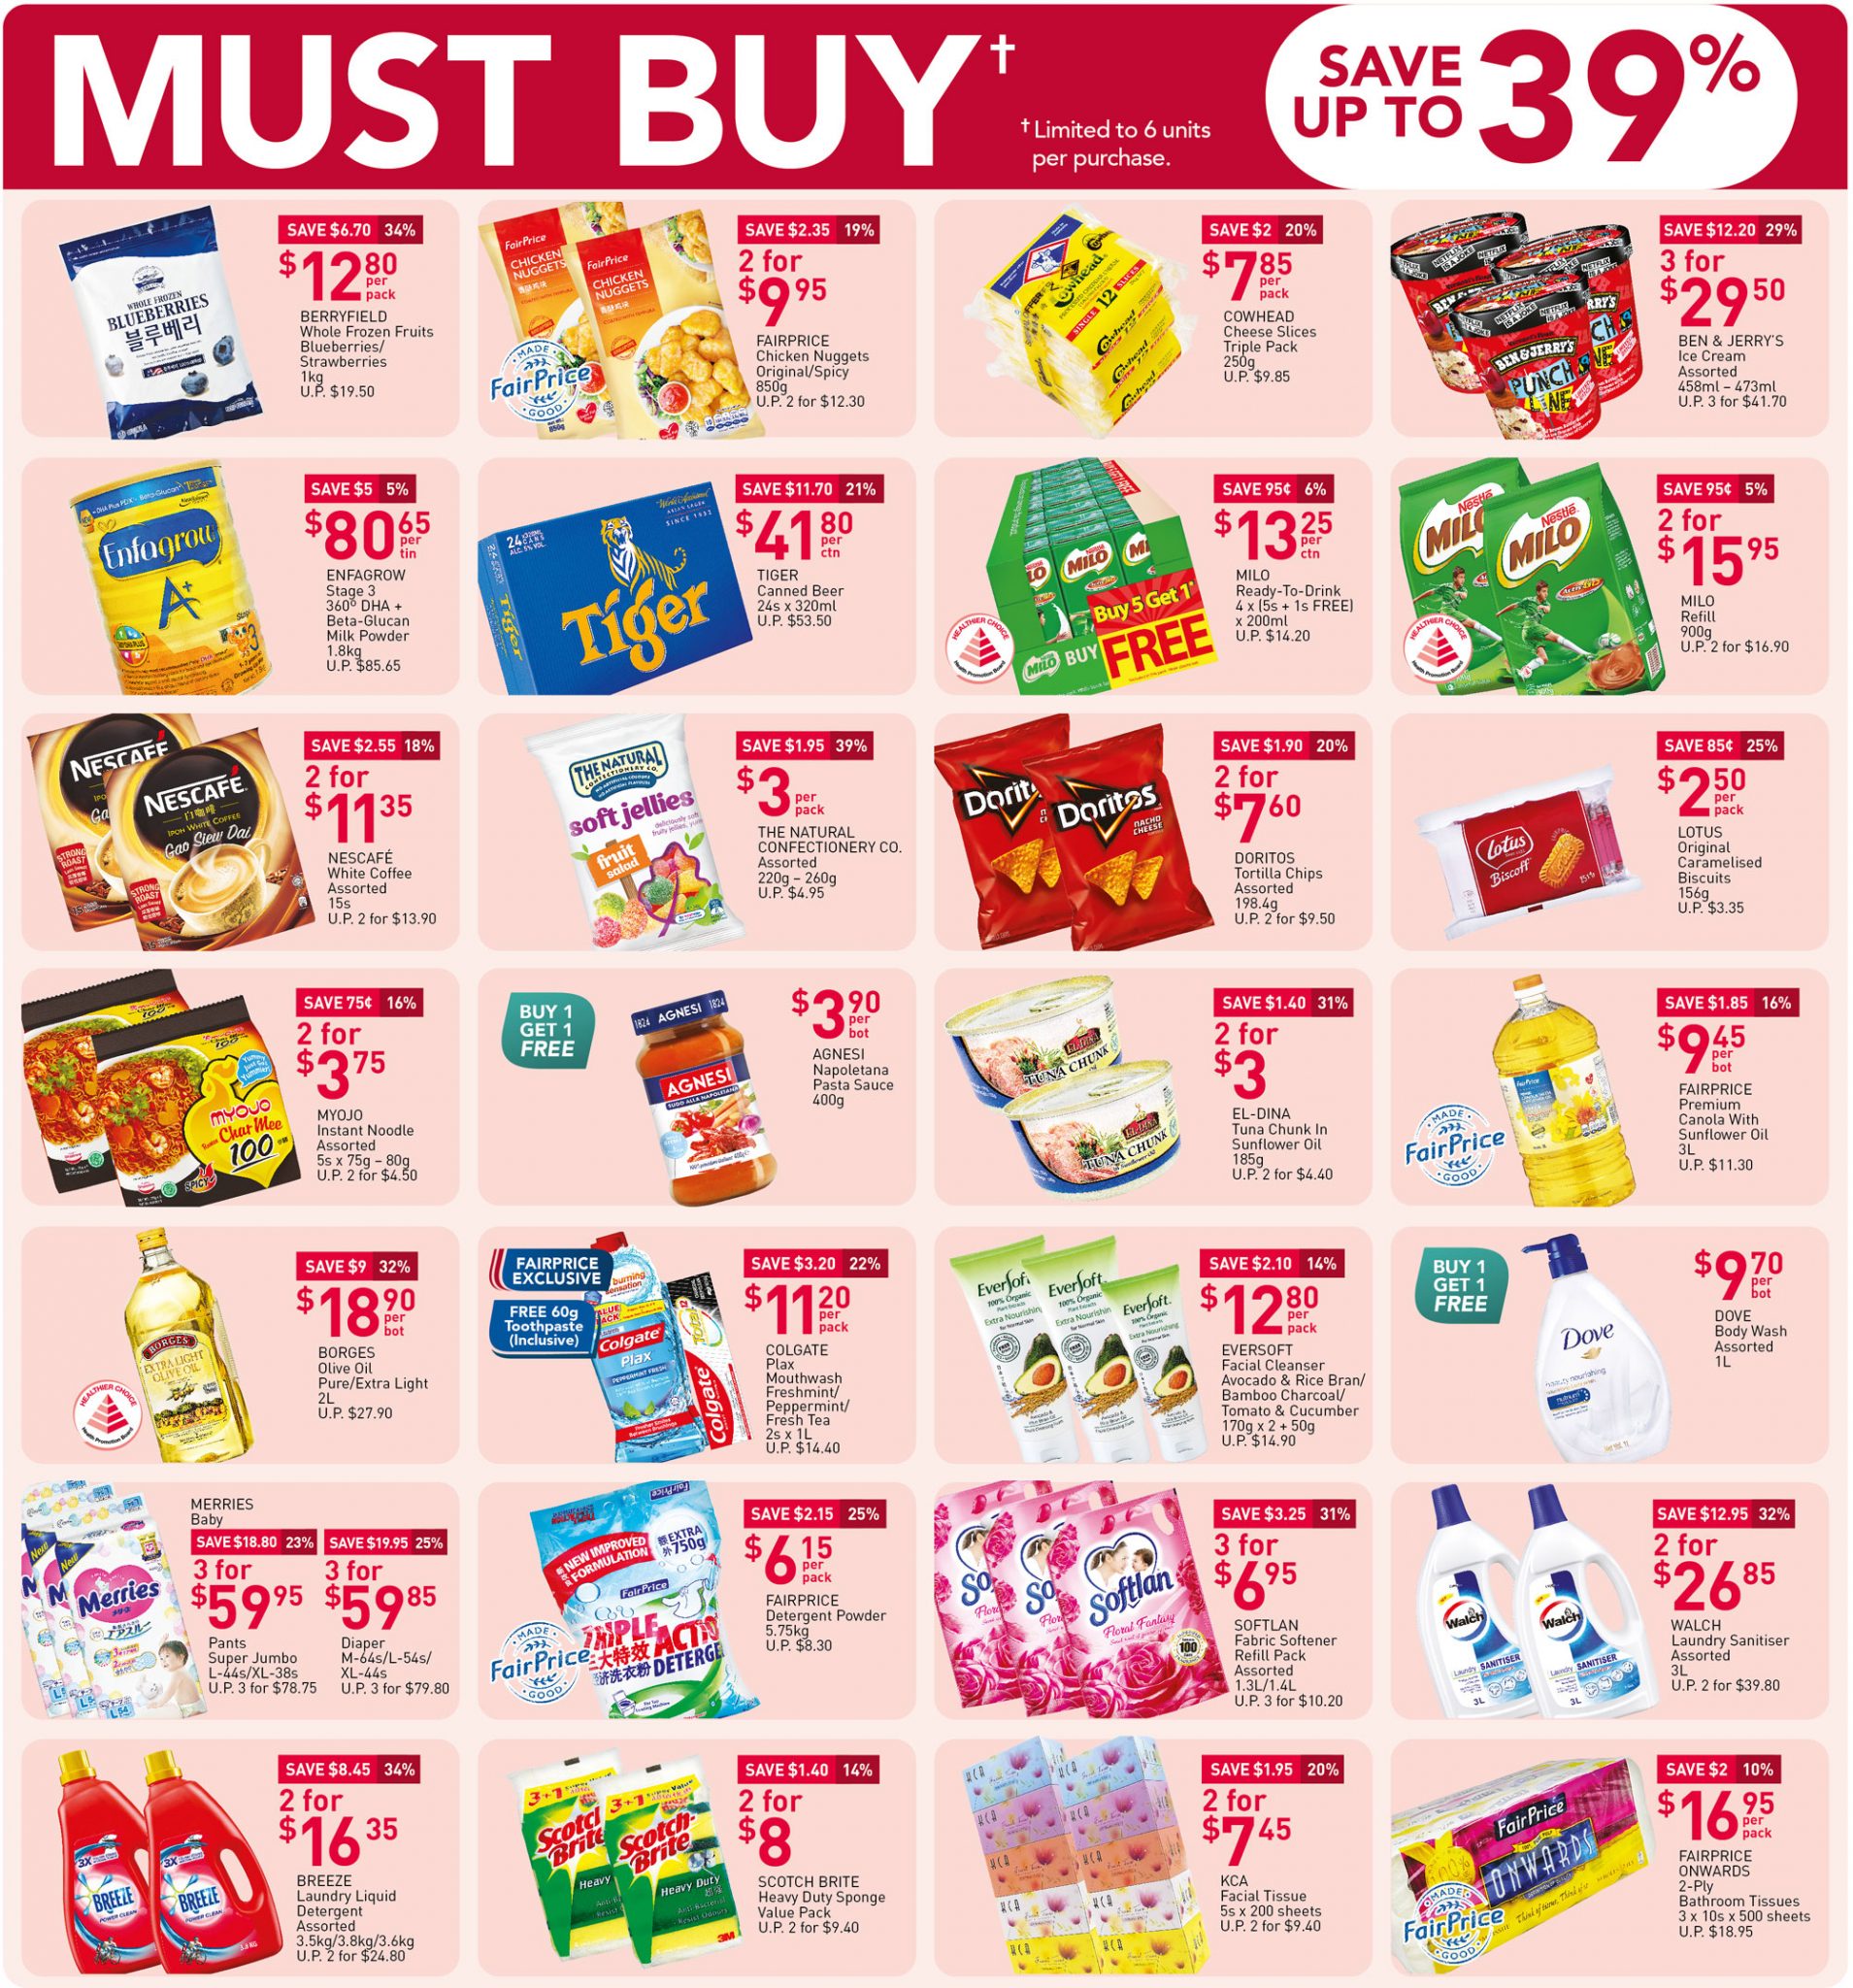 Must-buy items from now till 24 March 2021